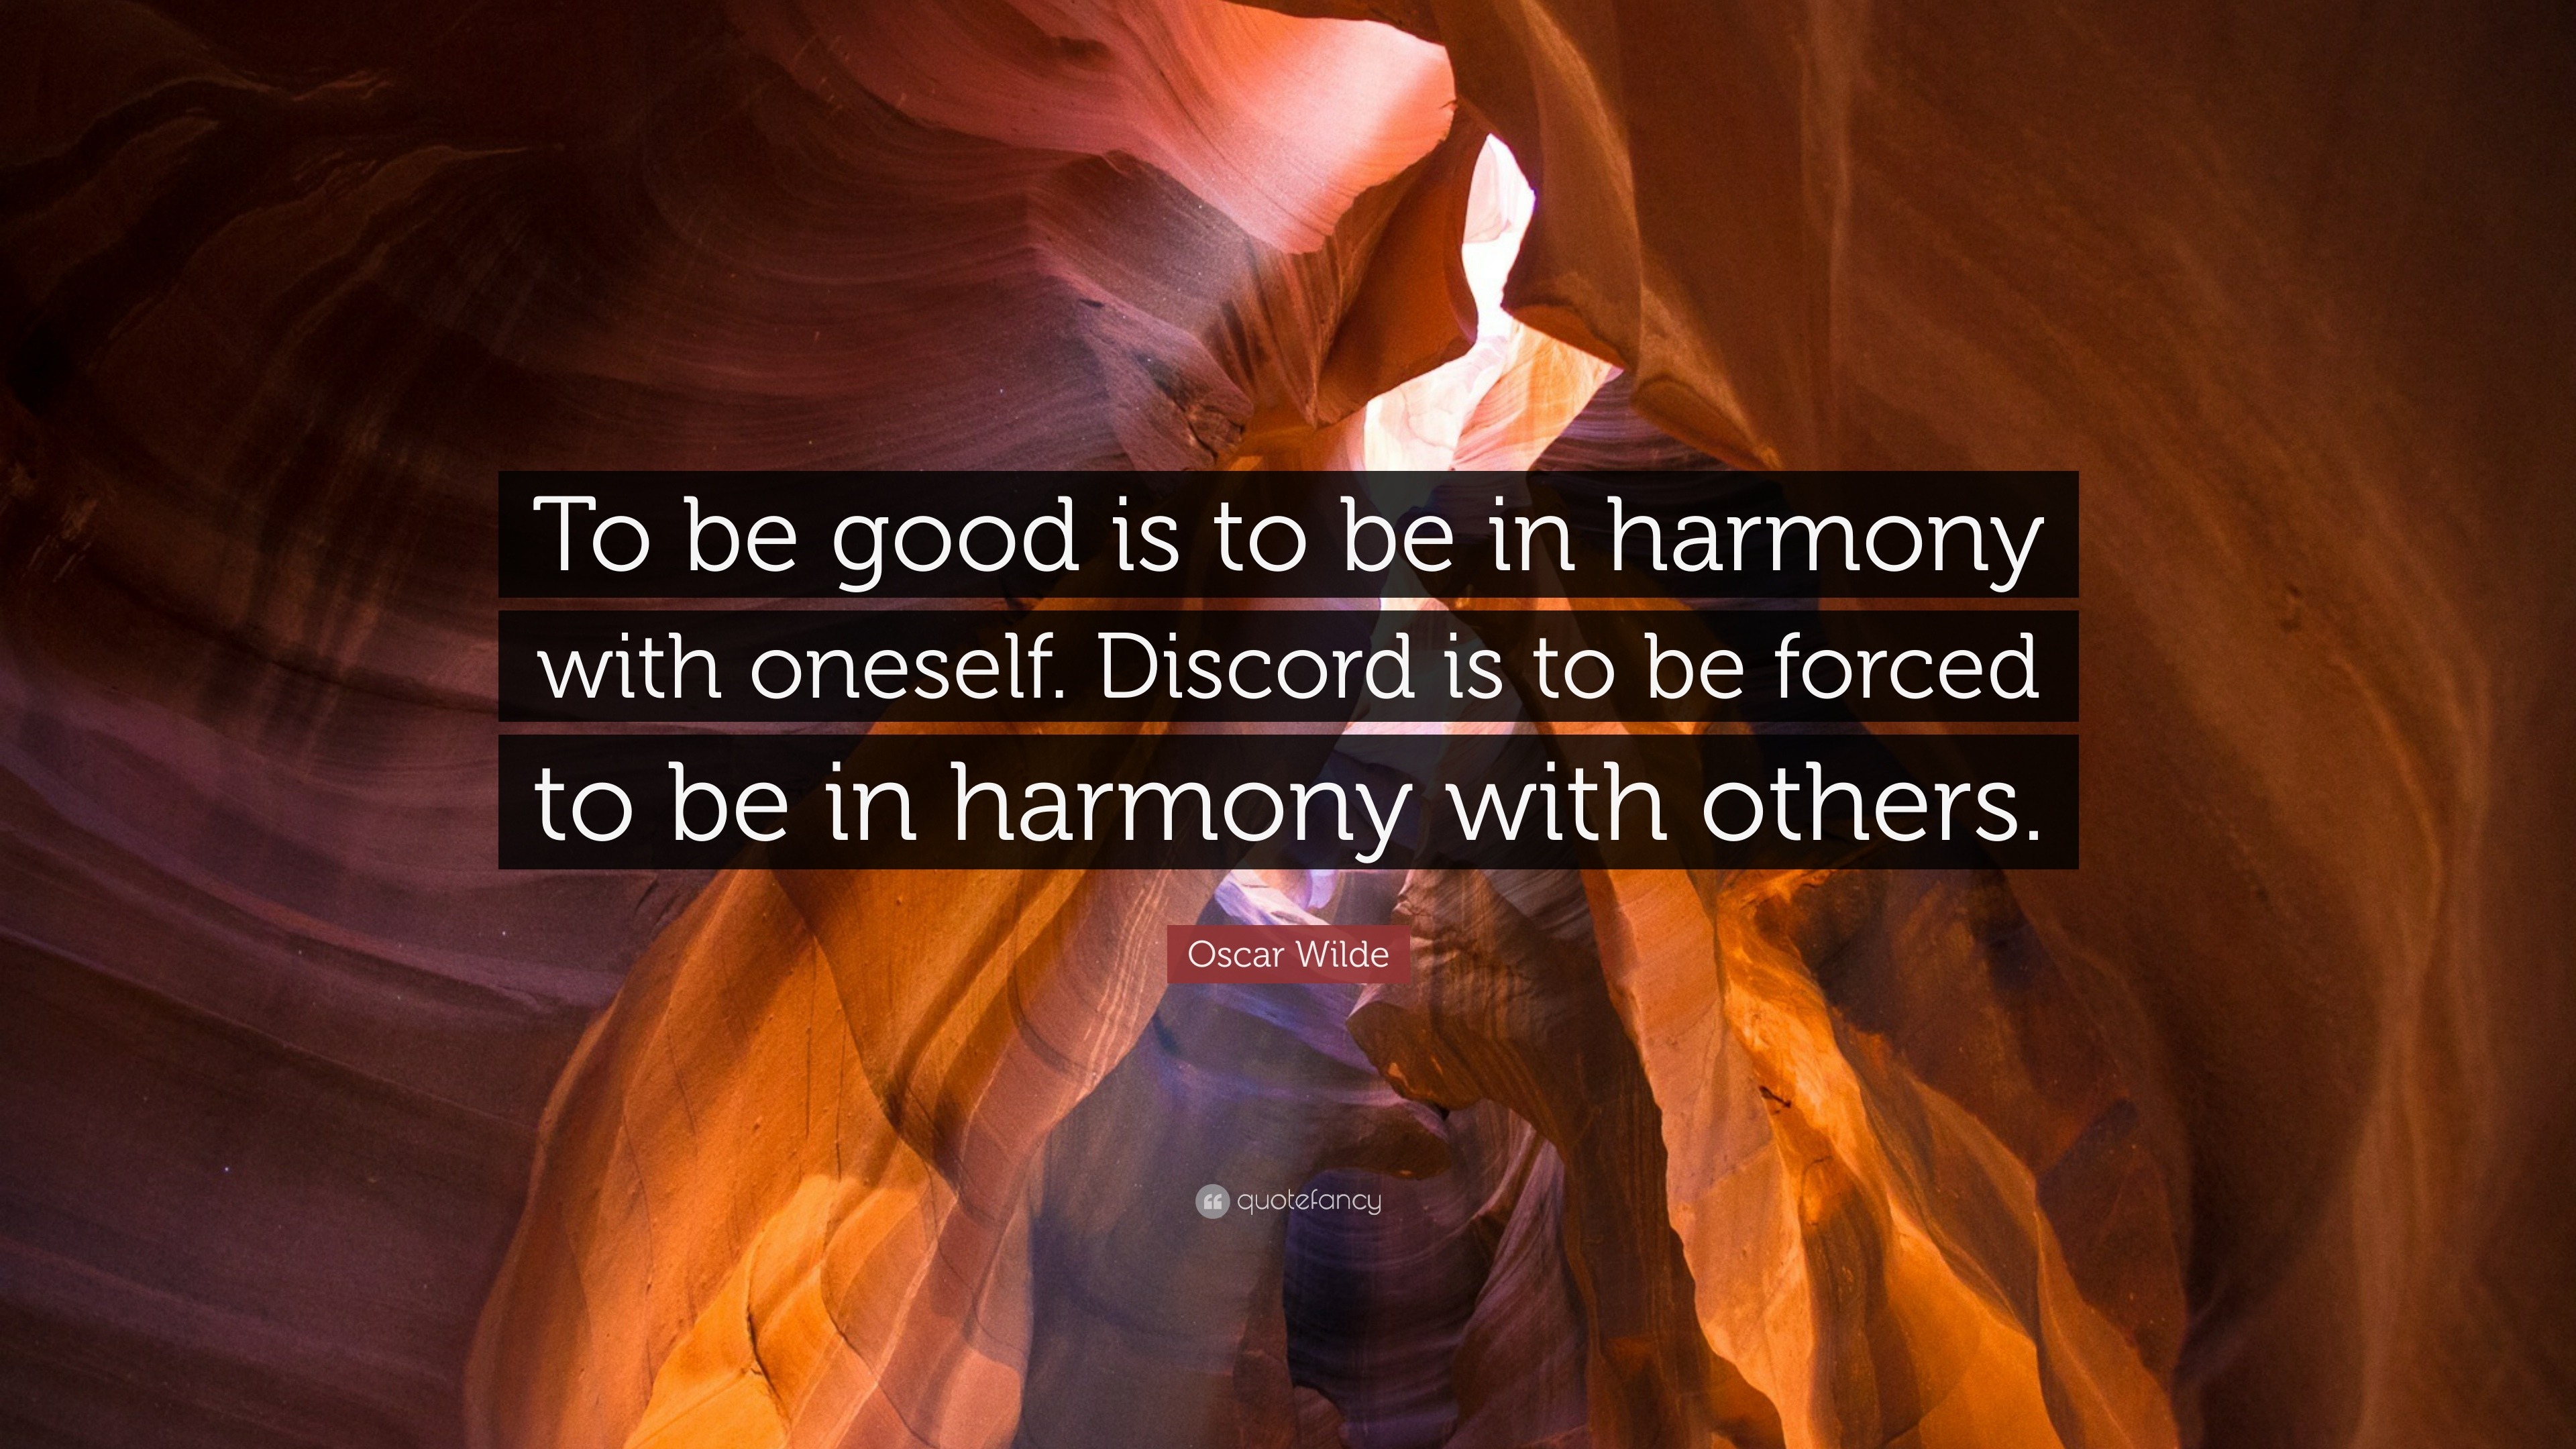 478063 Oscar Wilde Quote To Be Good Is To Be In Harmony With Oneself 